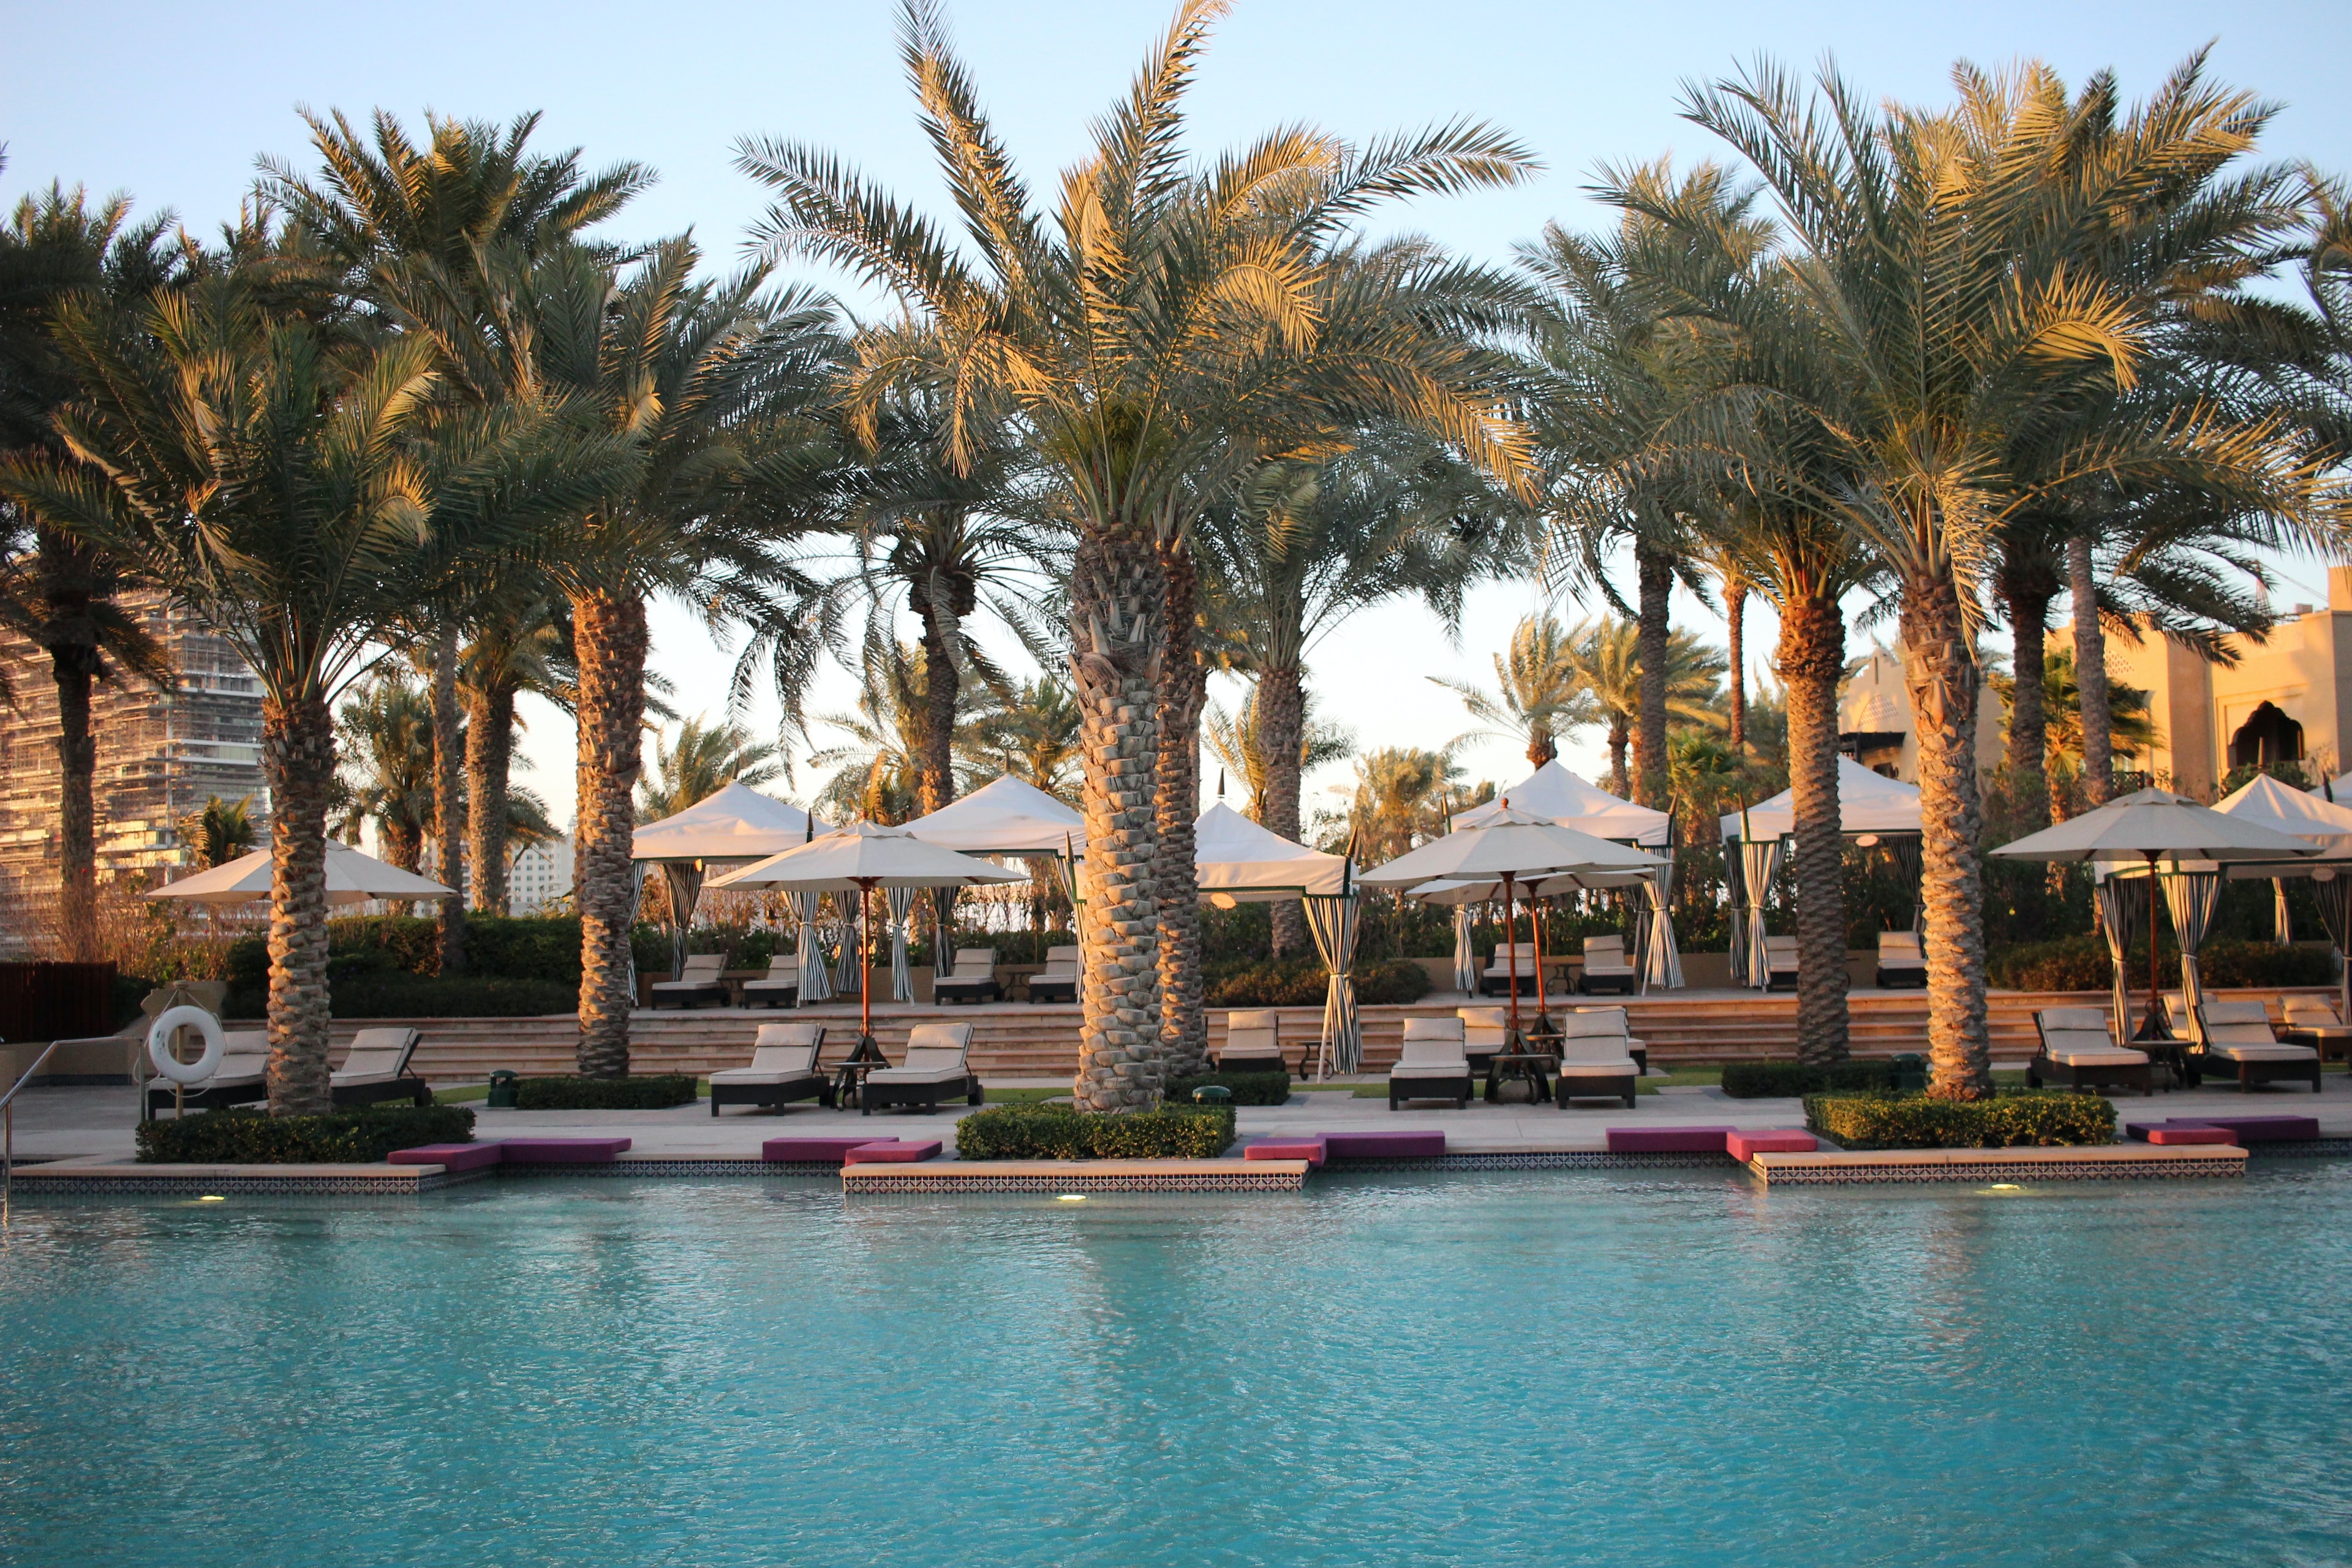 10 Indulgent Hotels to Stay in Dubai